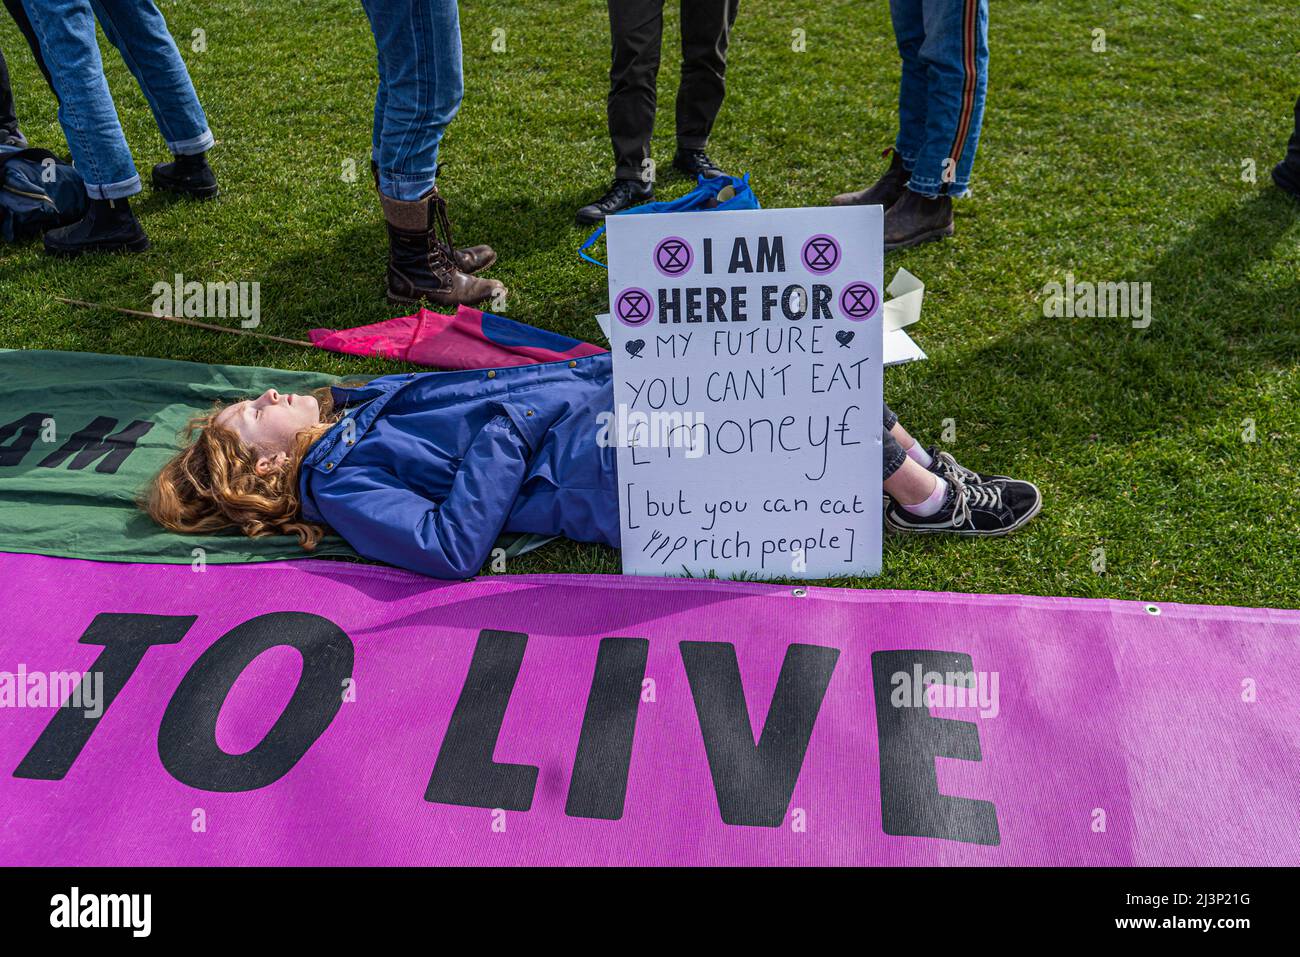 LONDON, UK. 9 April, 2022 .   Hundreds of climate activists from Extinction Rebellion gather in Hyde Park  before marching central London to demand climate justice and  an end to the fossil fuel economy. Extinction Rebellion has vowed to bring  more disruptive protests  planned around Easter to London.  Credit: amer ghazzal/Alamy Live News Stock Photo